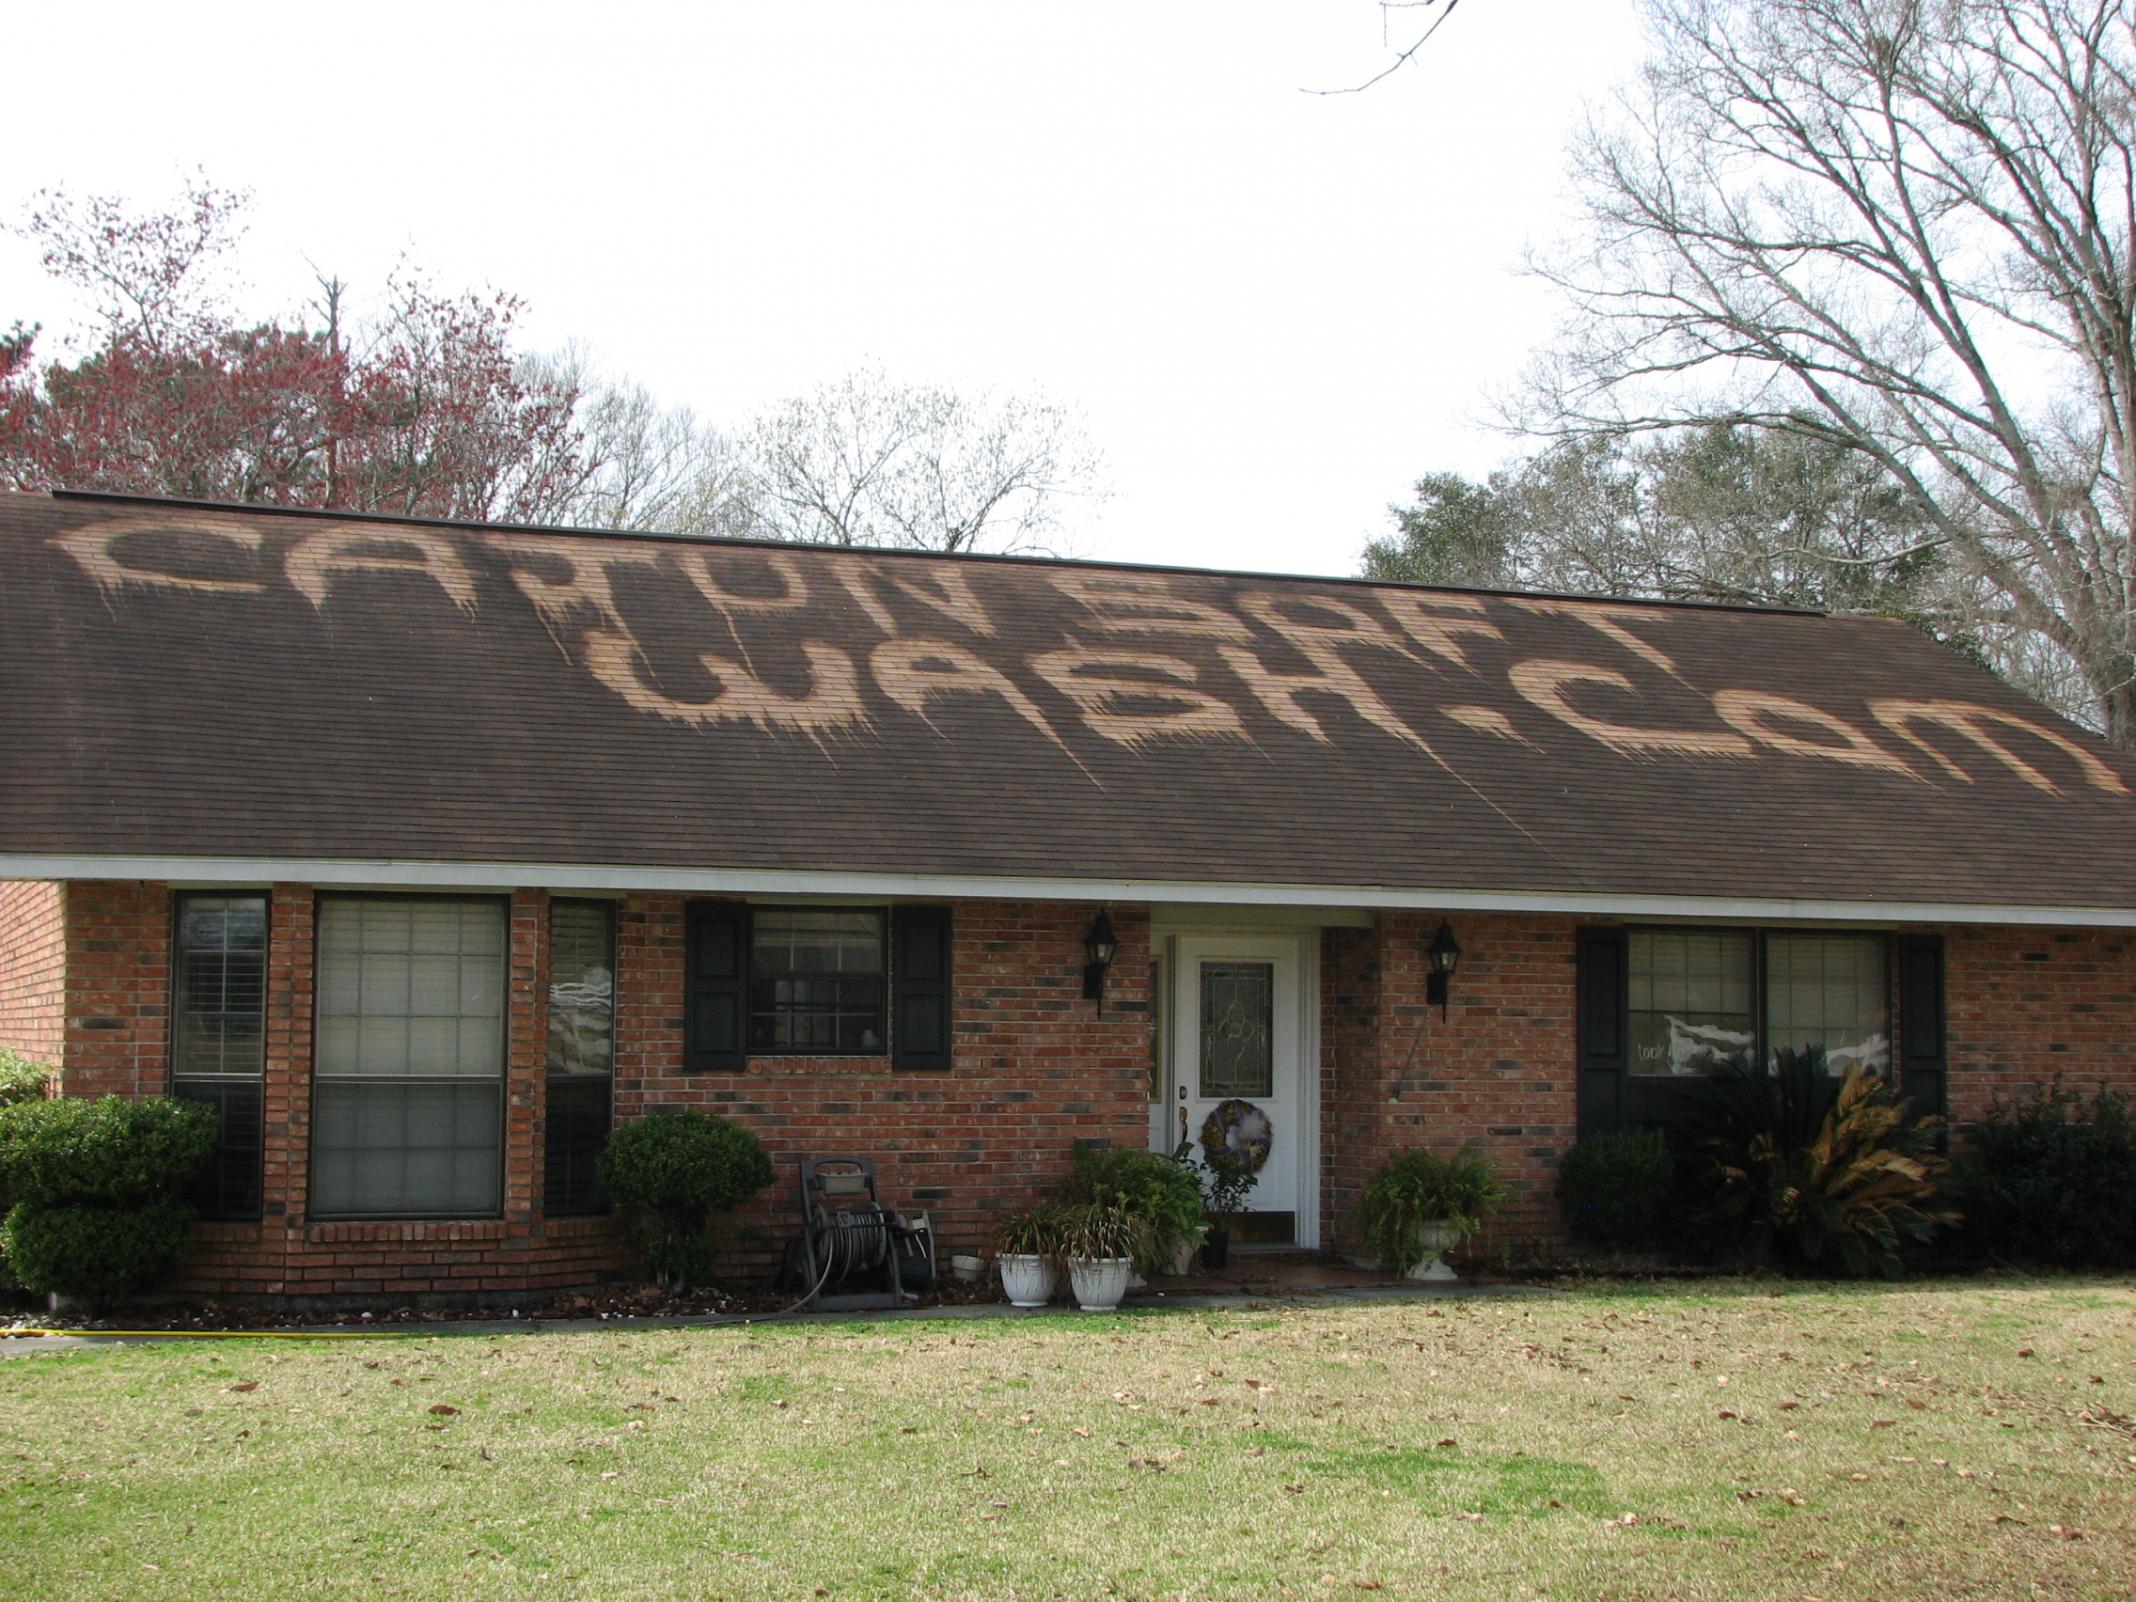 Baton Rouge Roof Cleaning - What's Eating Your Roof?